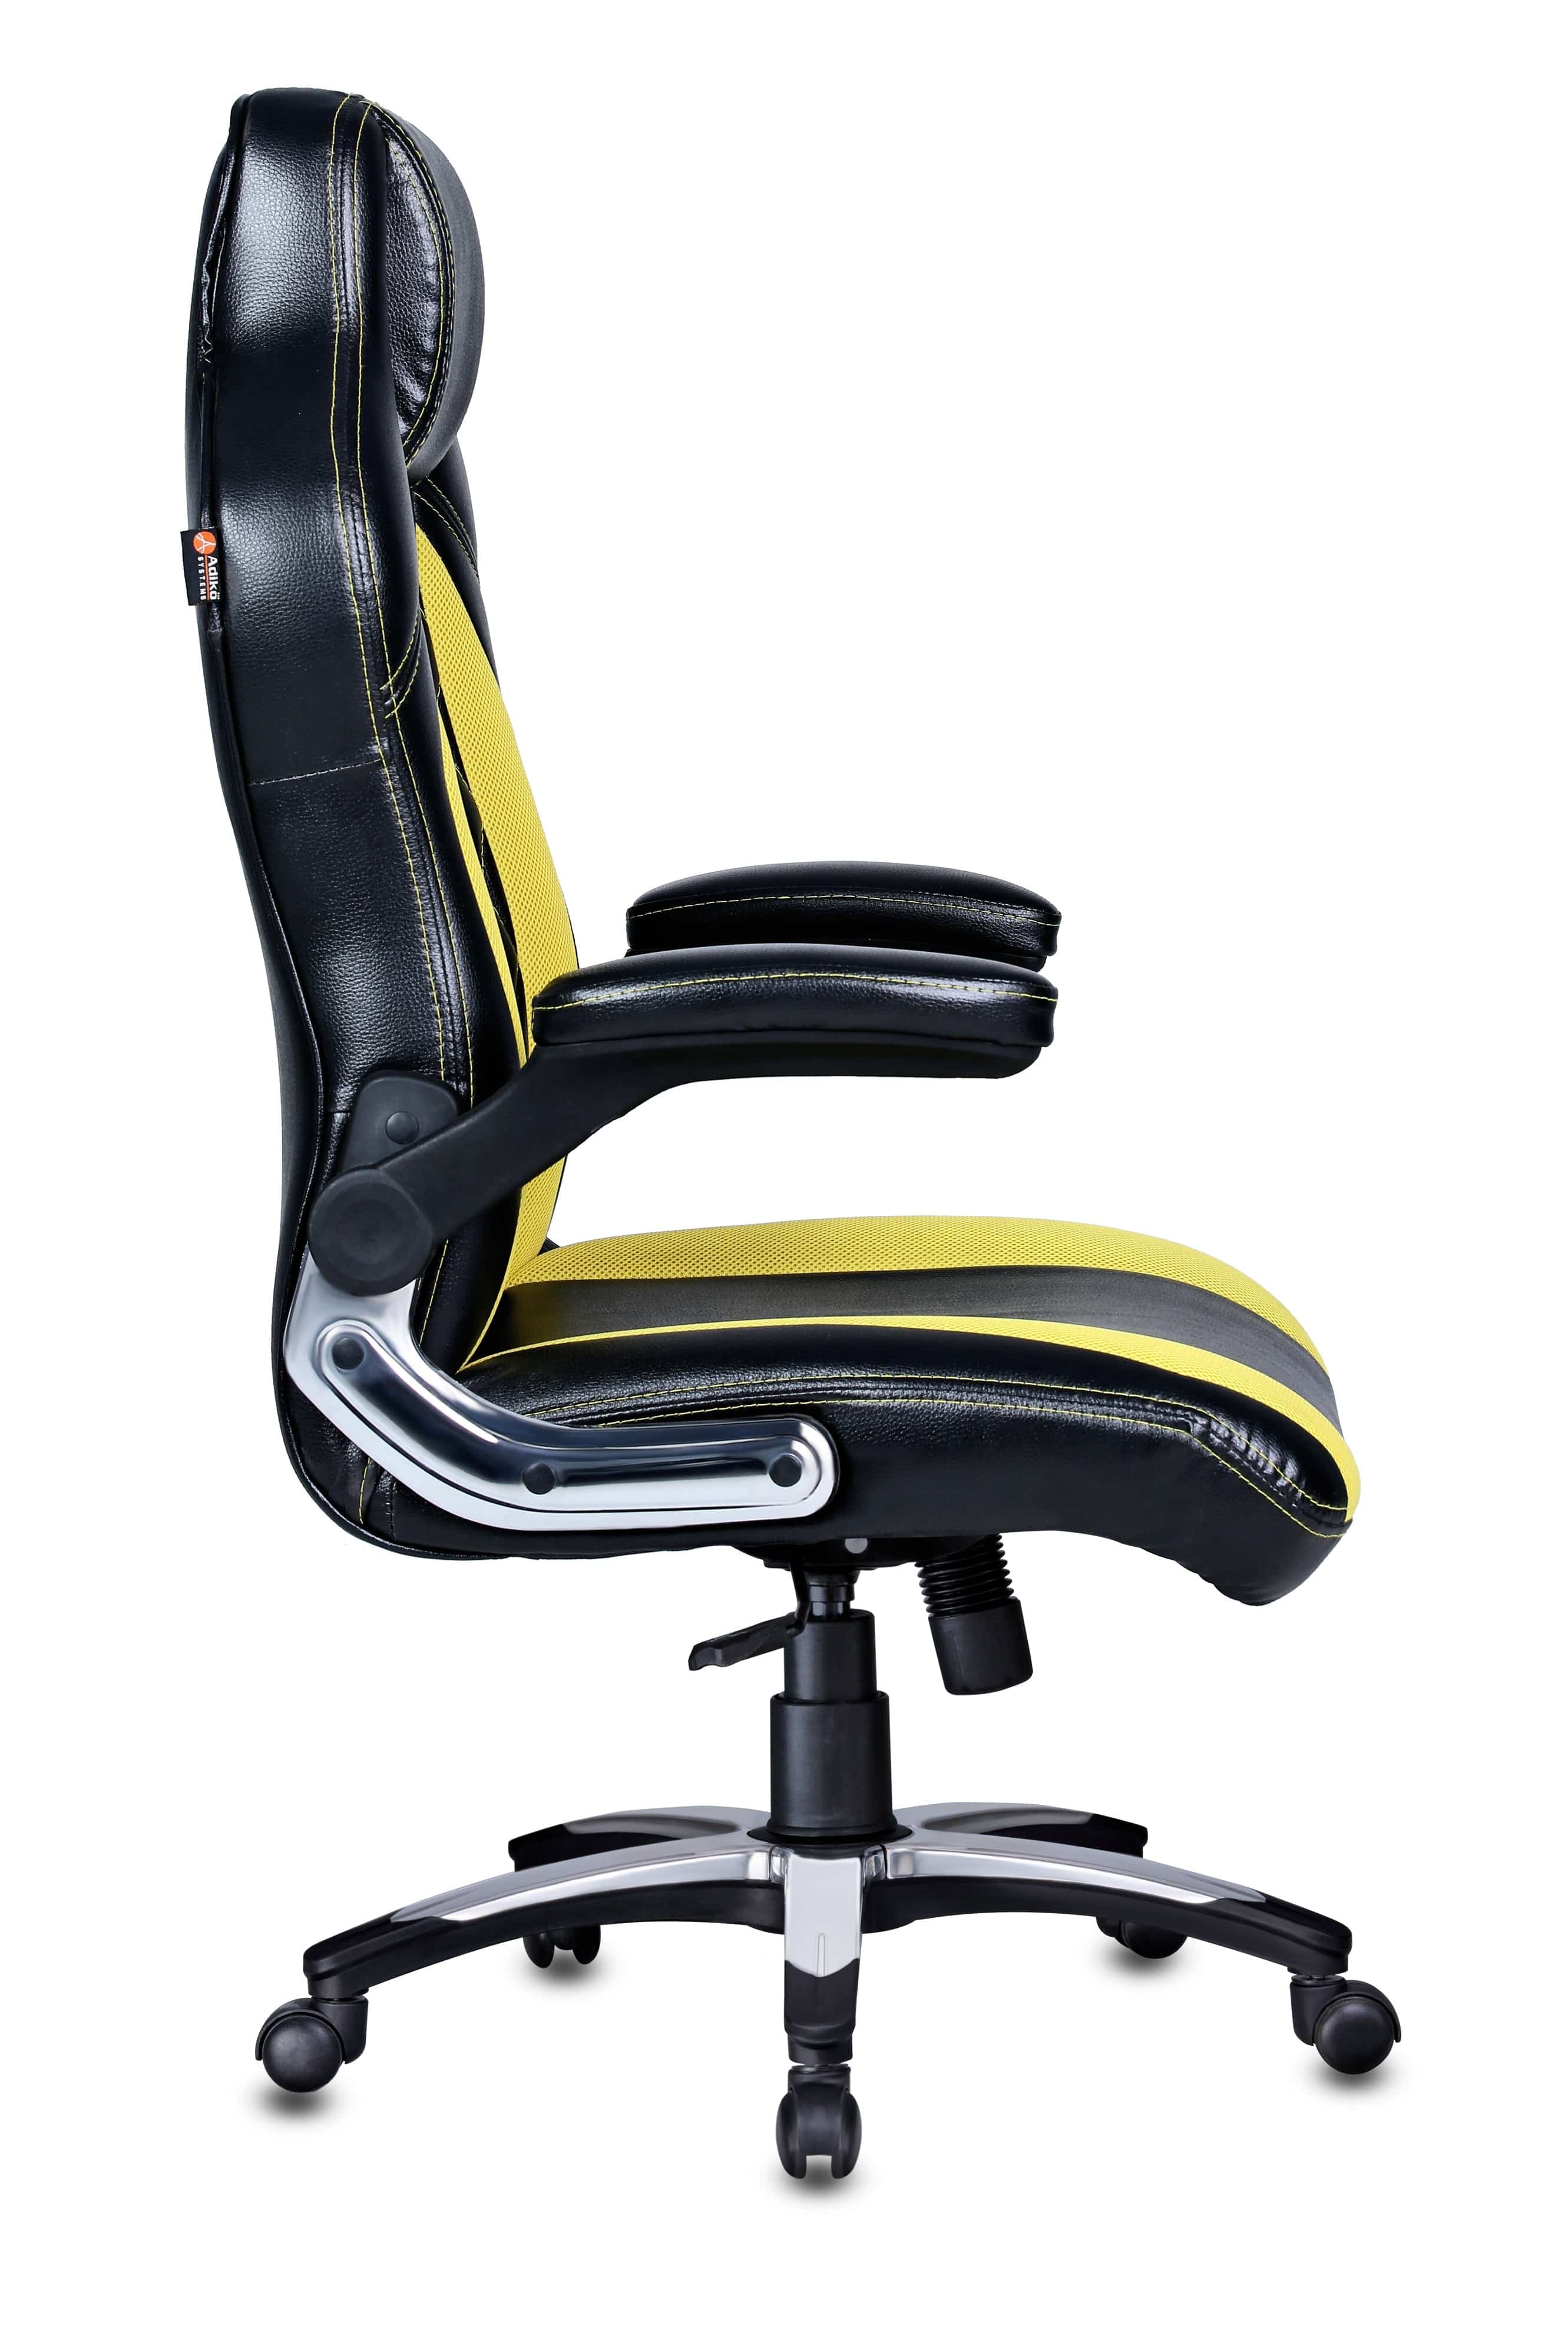 Smart Executive Chair in Black Colour by Adiko Systems